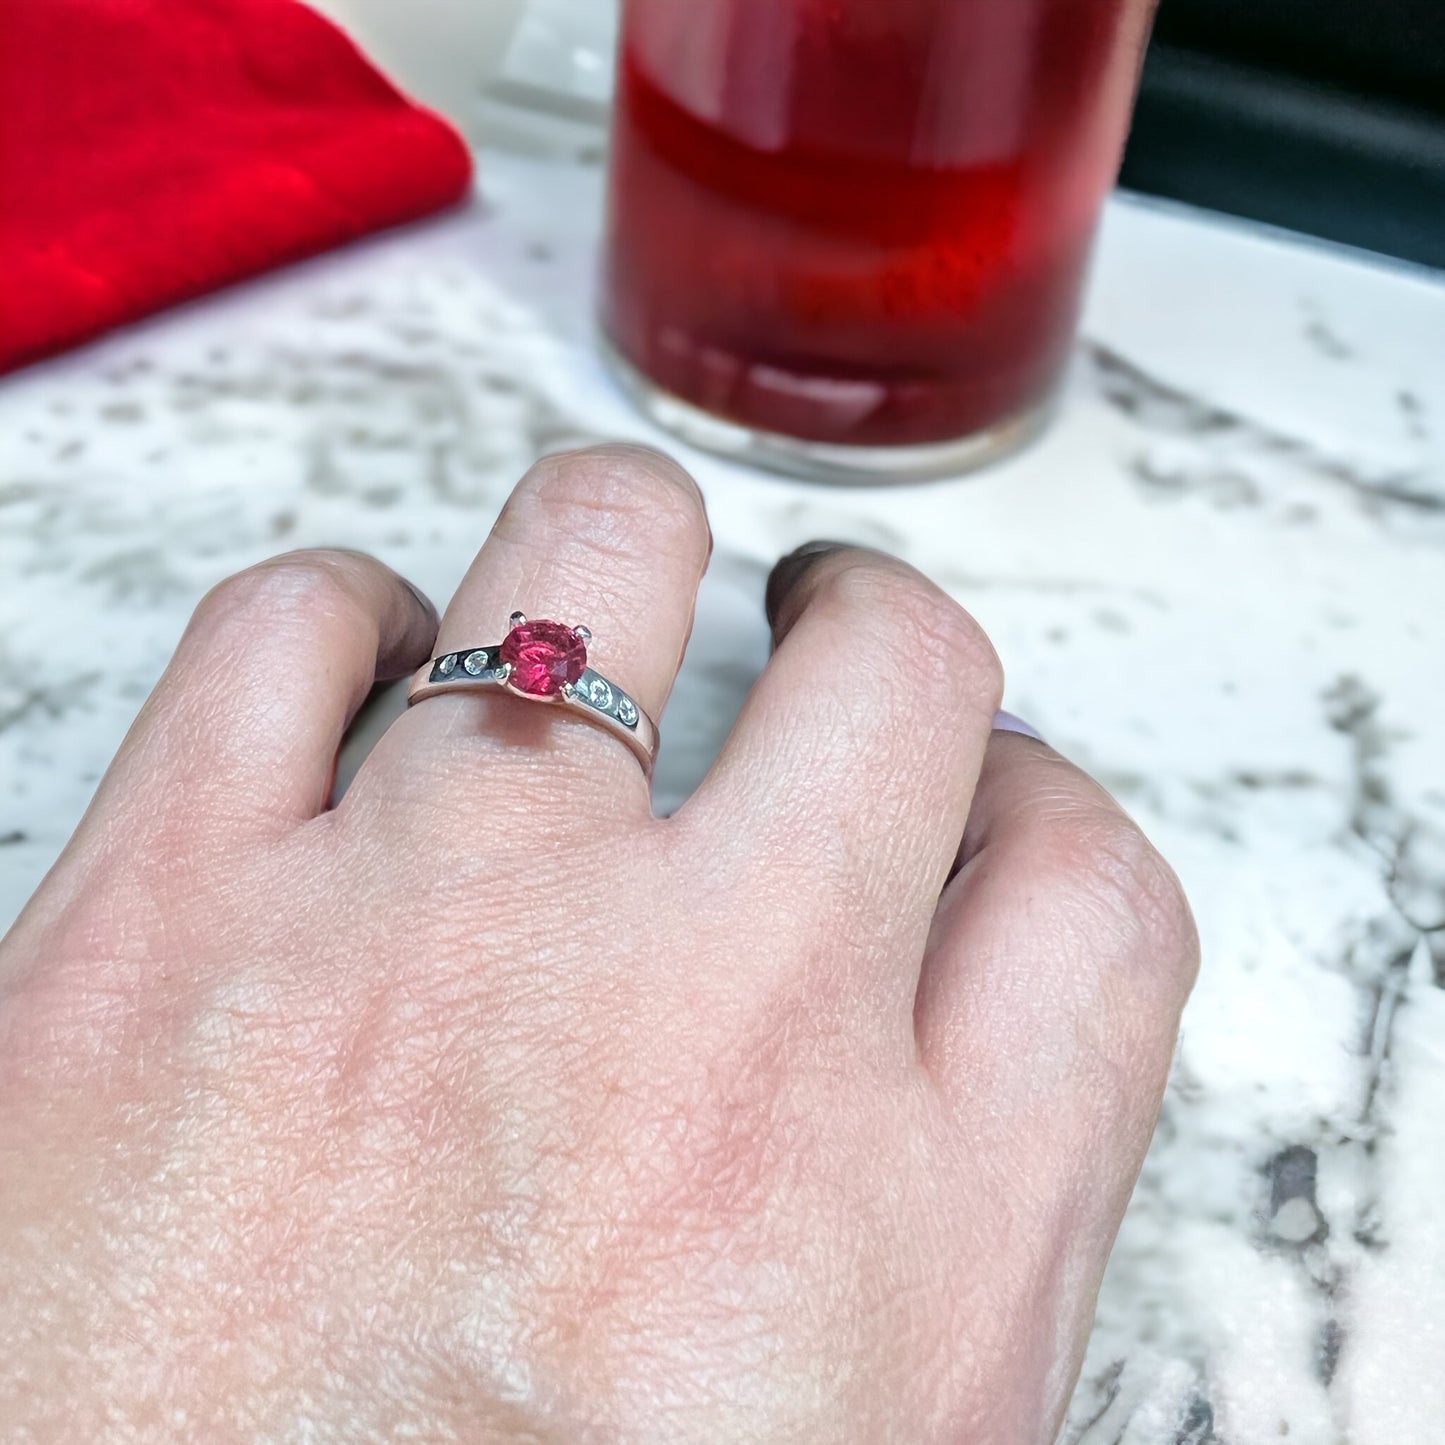 Single Ruby And 4 White Zircons The Silver Band